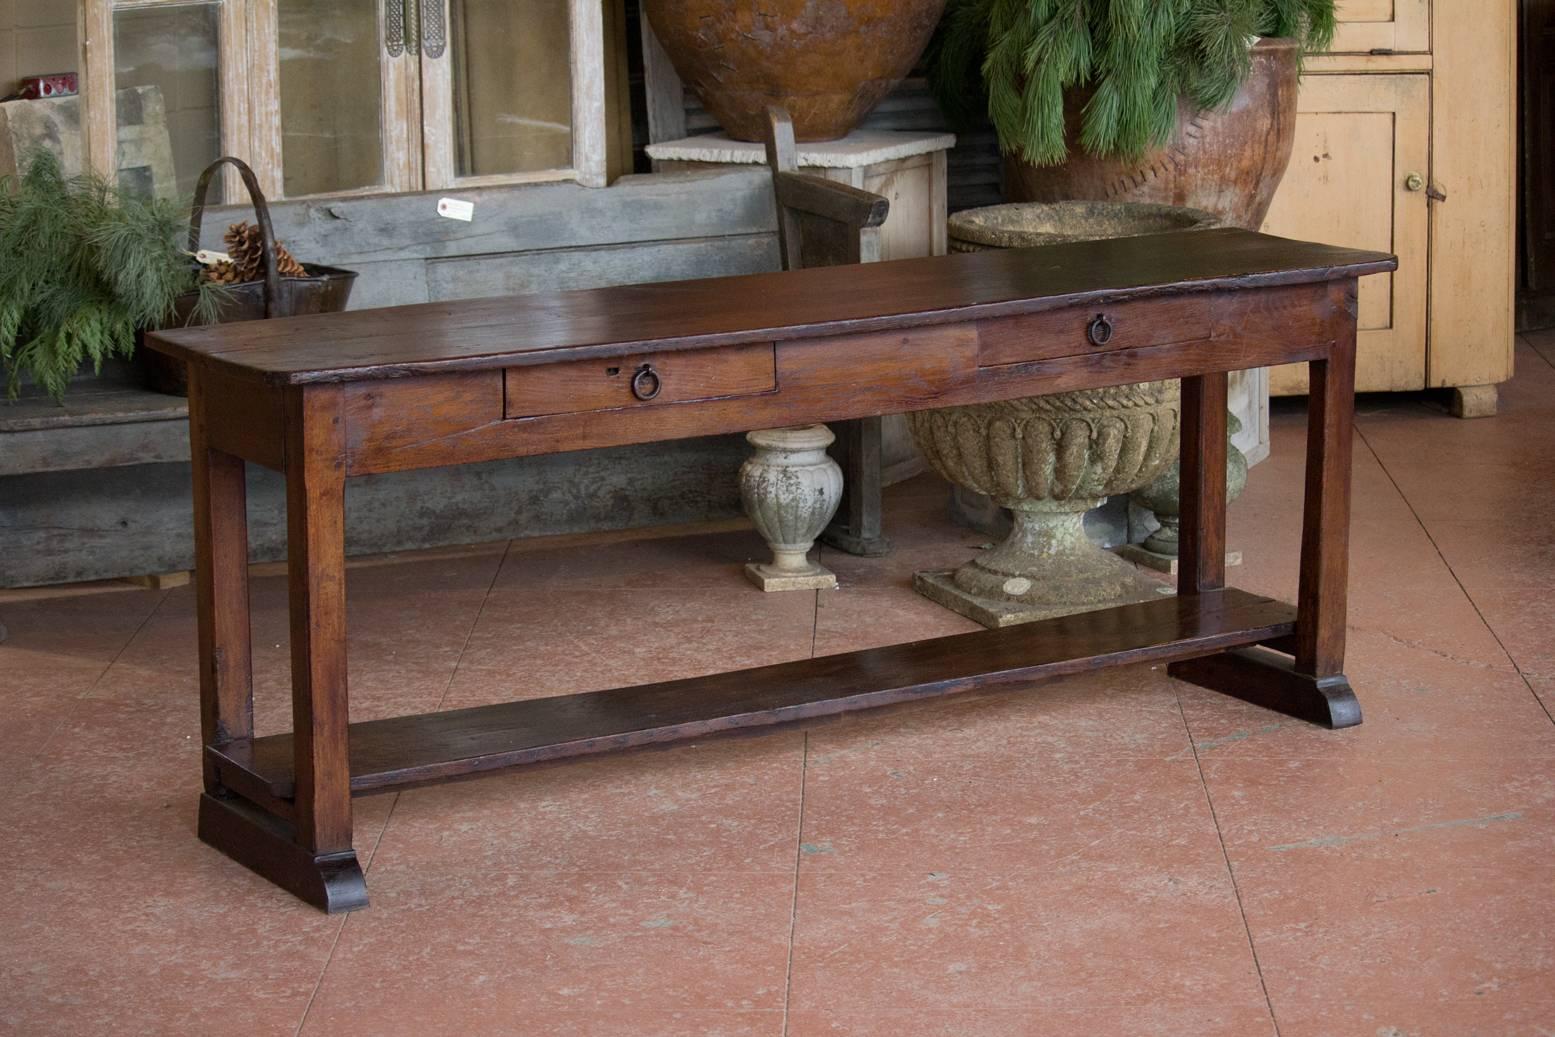 Antique oak two-drawer farmhouse serving table with pot shelf below from Burgundy, circa 1830.